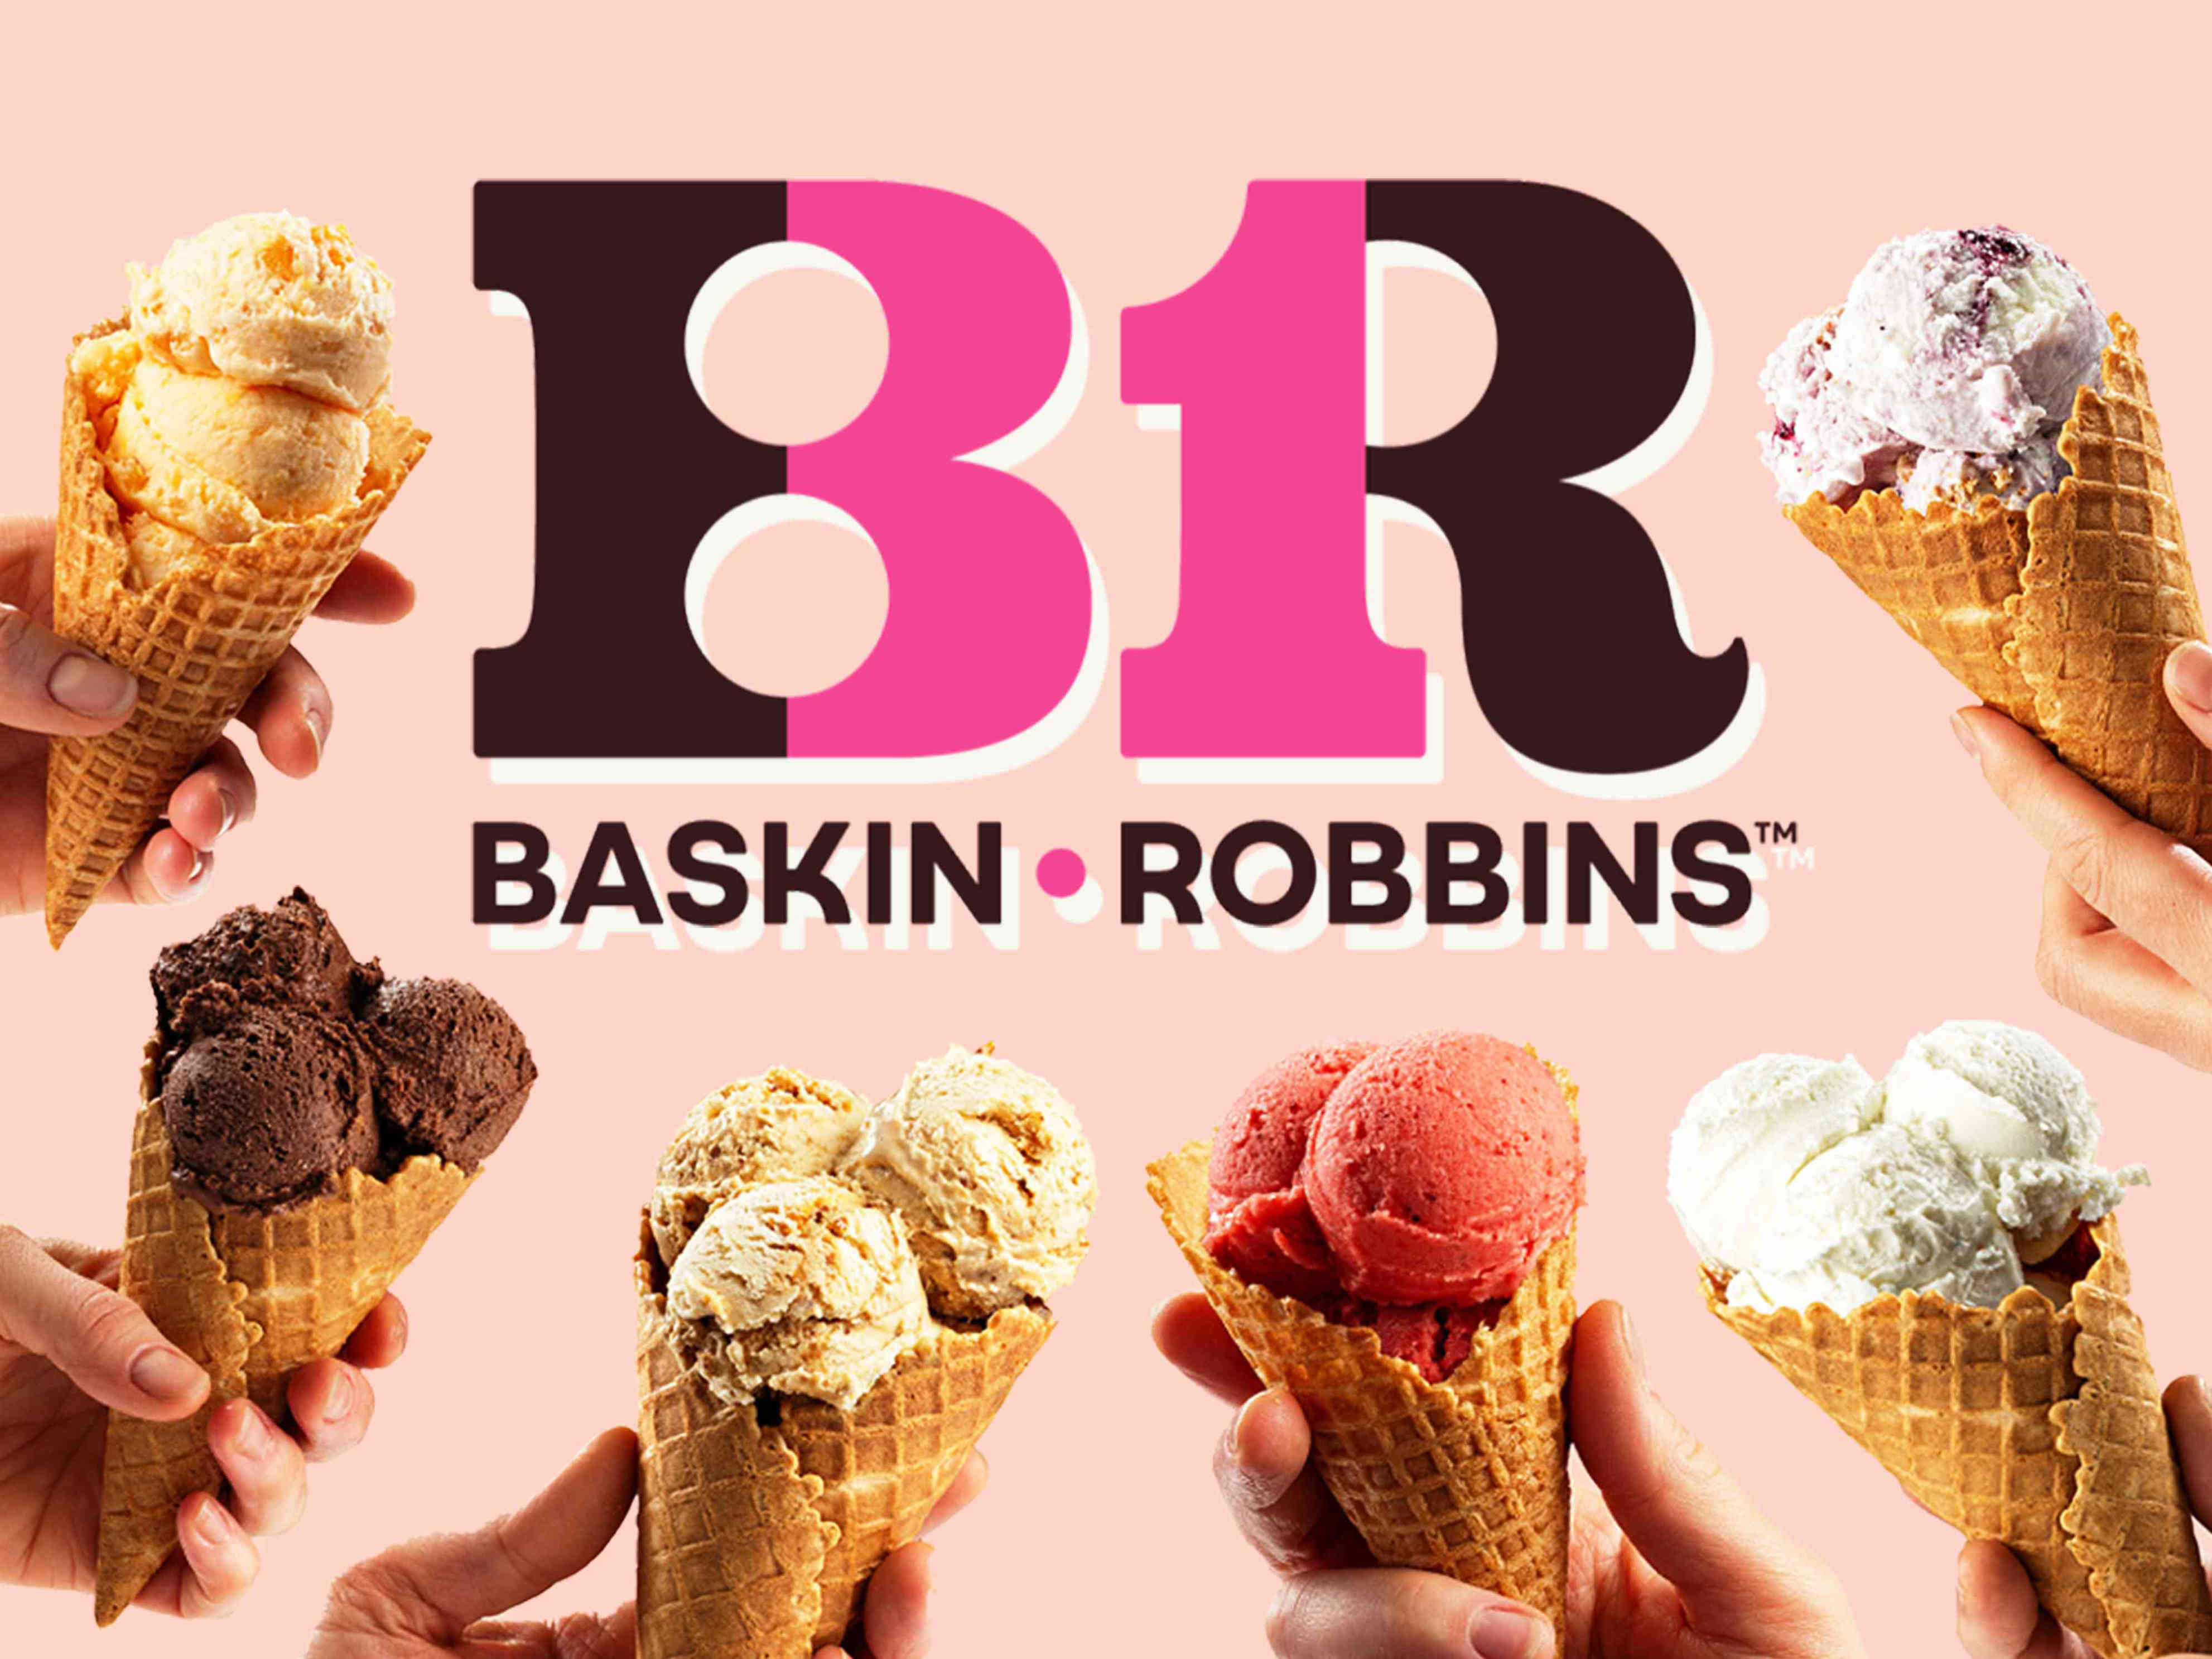 baskin-robbins' new flavor is a first-of-its-kind spring treat